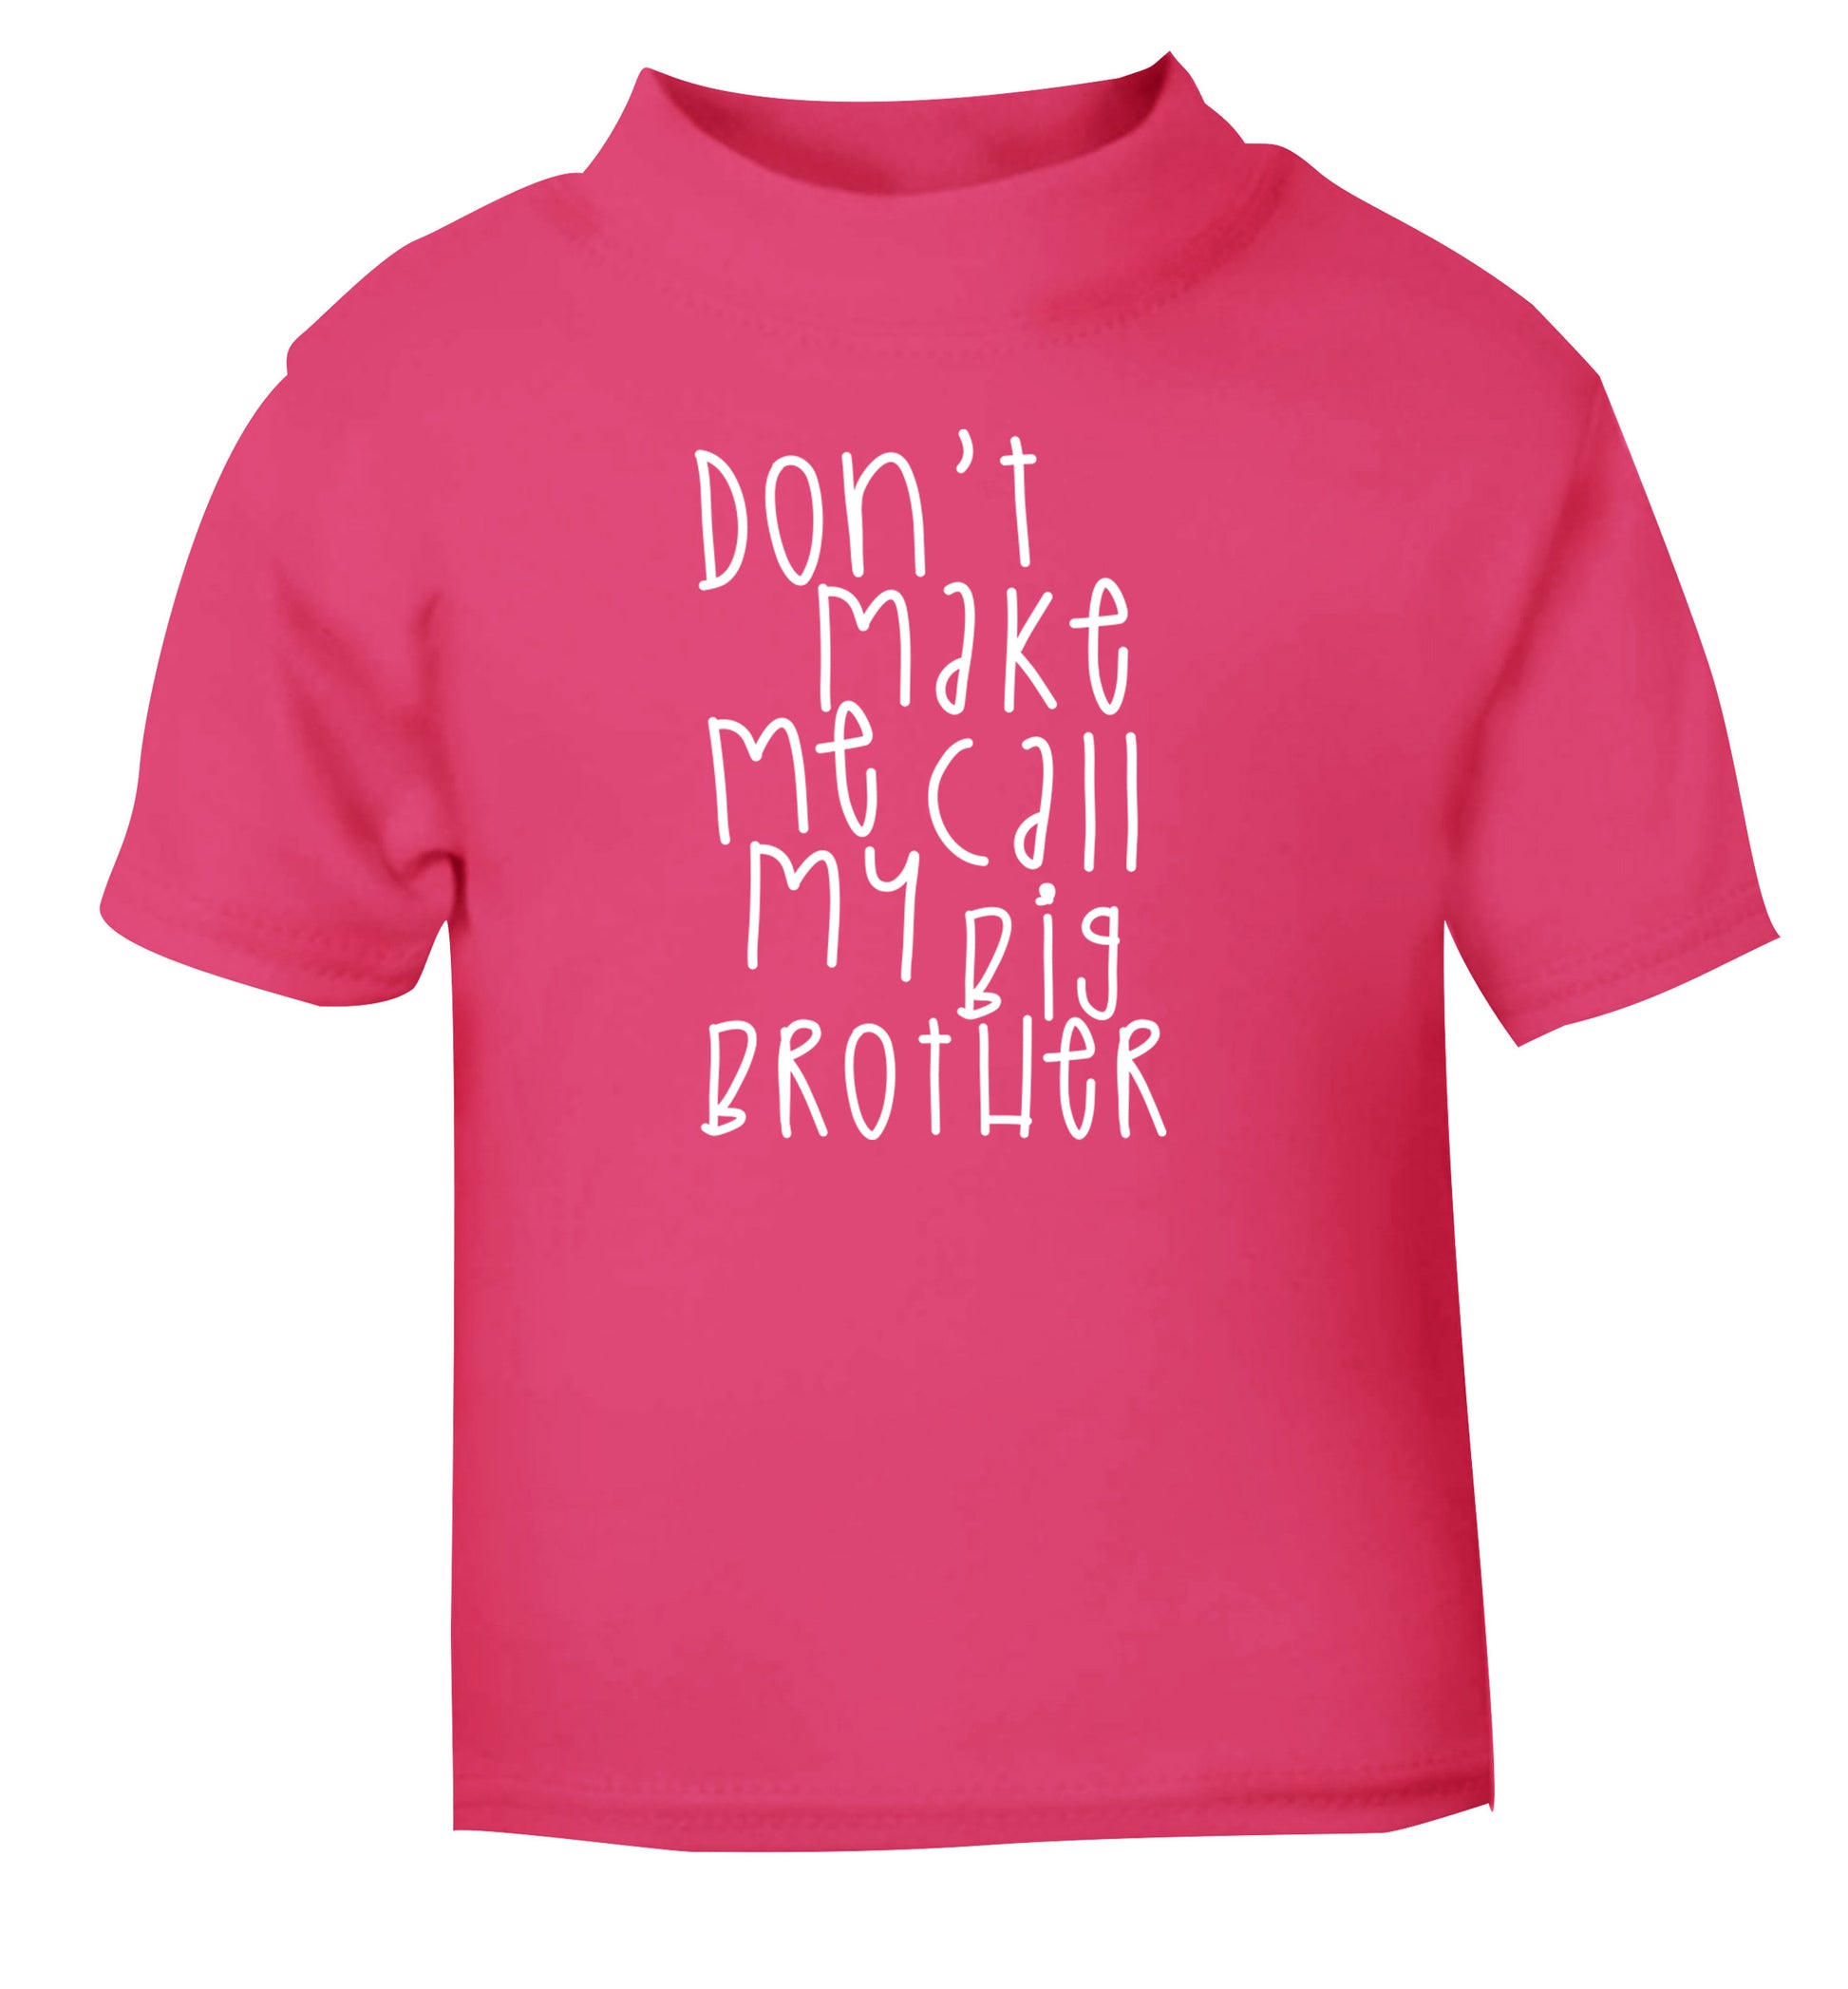 Don't make me call my big brother pink Baby Toddler Tshirt 2 Years